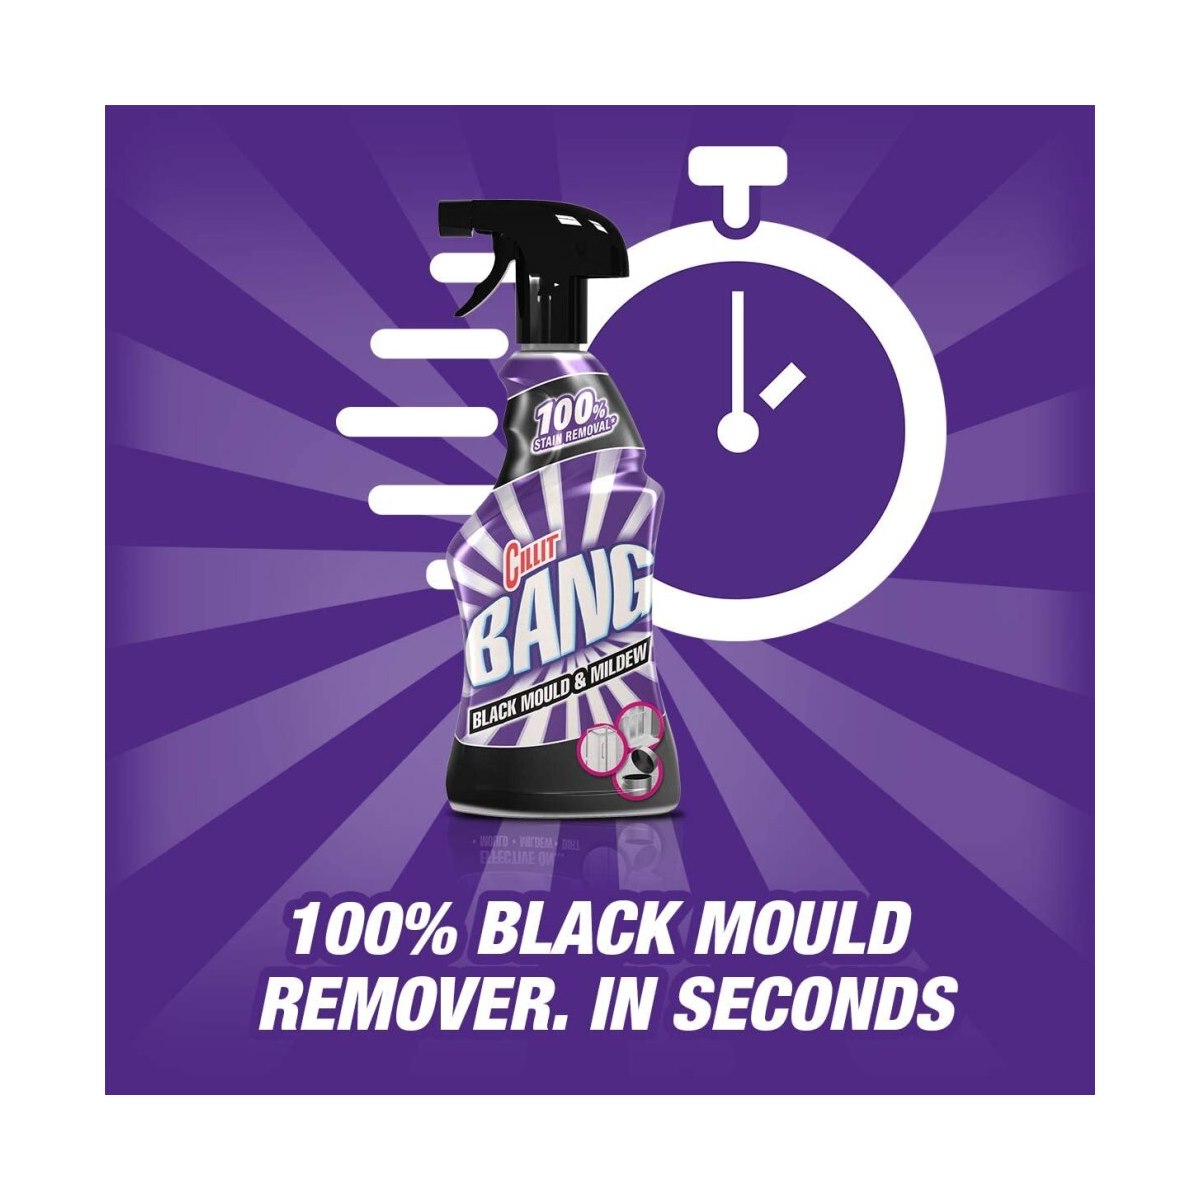 Where to Buy Cillit Bang Black Mould Remover